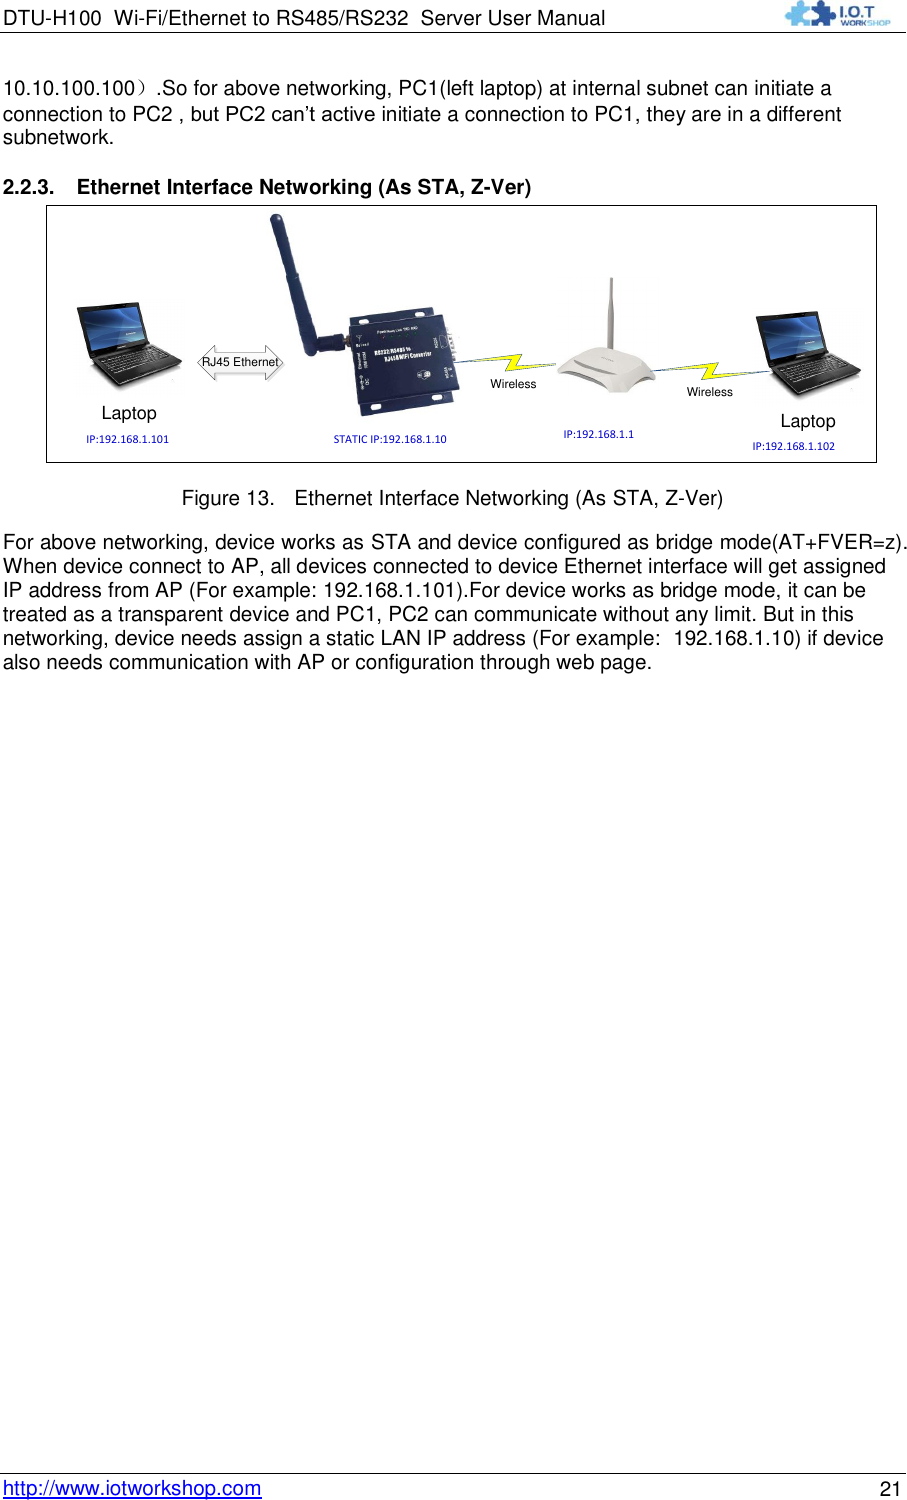 DTU-H100 Wi-Fi/Ethernet to RS485/RS232  Server User Manual    http://www.iotworkshop.com 21 10.10.100.100）.So for above networking, PC1(left laptop) at internal subnet can initiate a connection to PC2 , but PC2 can‟t active initiate a connection to PC1, they are in a different subnetwork. 2.2.3. Ethernet Interface Networking (As STA, Z-Ver) LaptopWirelessRJ45 EthernetIP:192.168.1.101LaptopIP:192.168.1.1WirelessIP:192.168.1.102STATIC IP:192.168.1.10 Figure 13. Ethernet Interface Networking (As STA, Z-Ver) For above networking, device works as STA and device configured as bridge mode(AT+FVER=z). When device connect to AP, all devices connected to device Ethernet interface will get assigned IP address from AP (For example: 192.168.1.101).For device works as bridge mode, it can be treated as a transparent device and PC1, PC2 can communicate without any limit. But in this networking, device needs assign a static LAN IP address (For example:  192.168.1.10) if device also needs communication with AP or configuration through web page.   